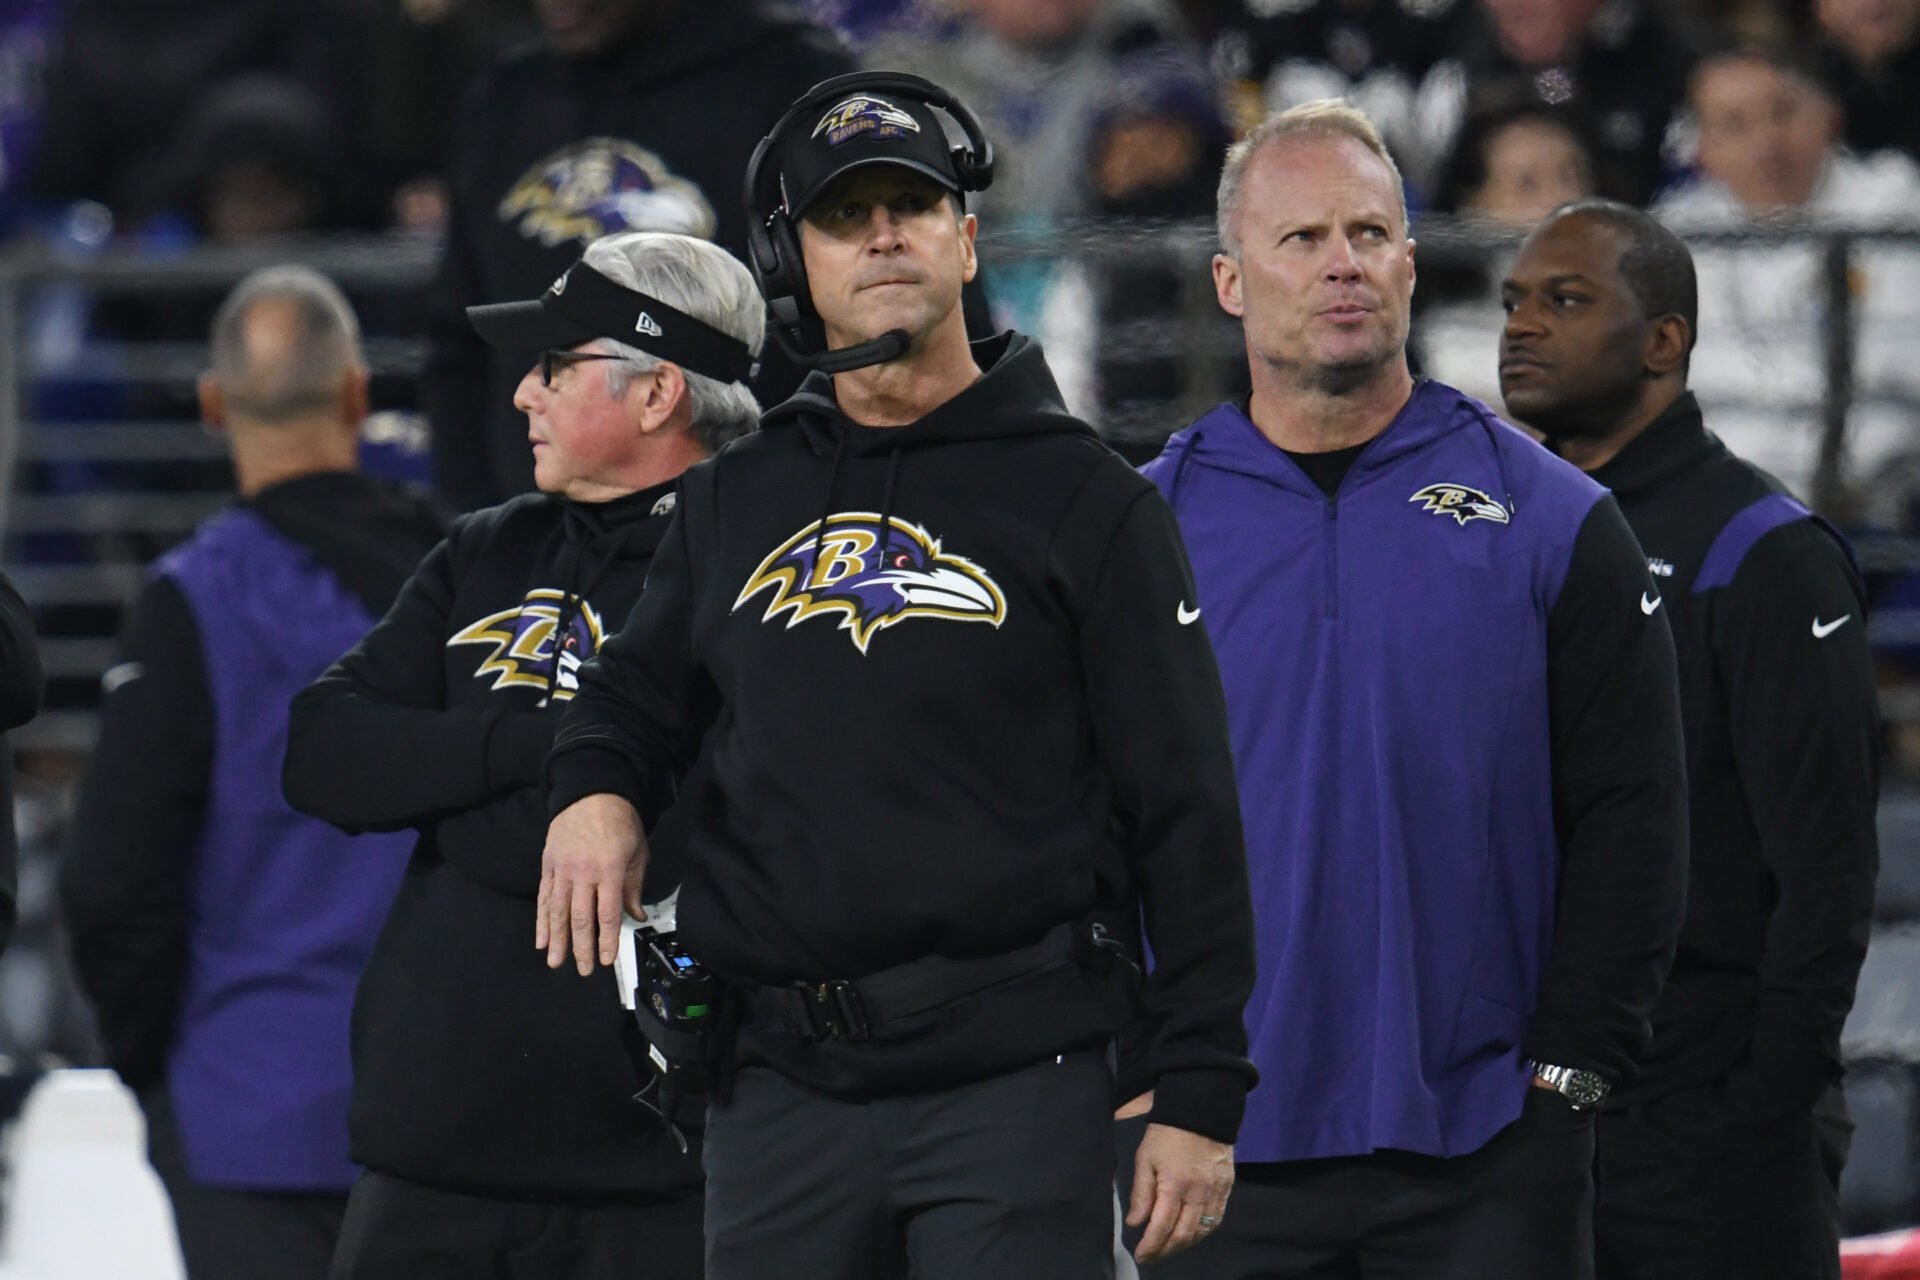 Baltimore Ravens head coach John Harbaugh looks onto the field during the game against the Pittsburgh Steelers at M&T Bank Stadium.